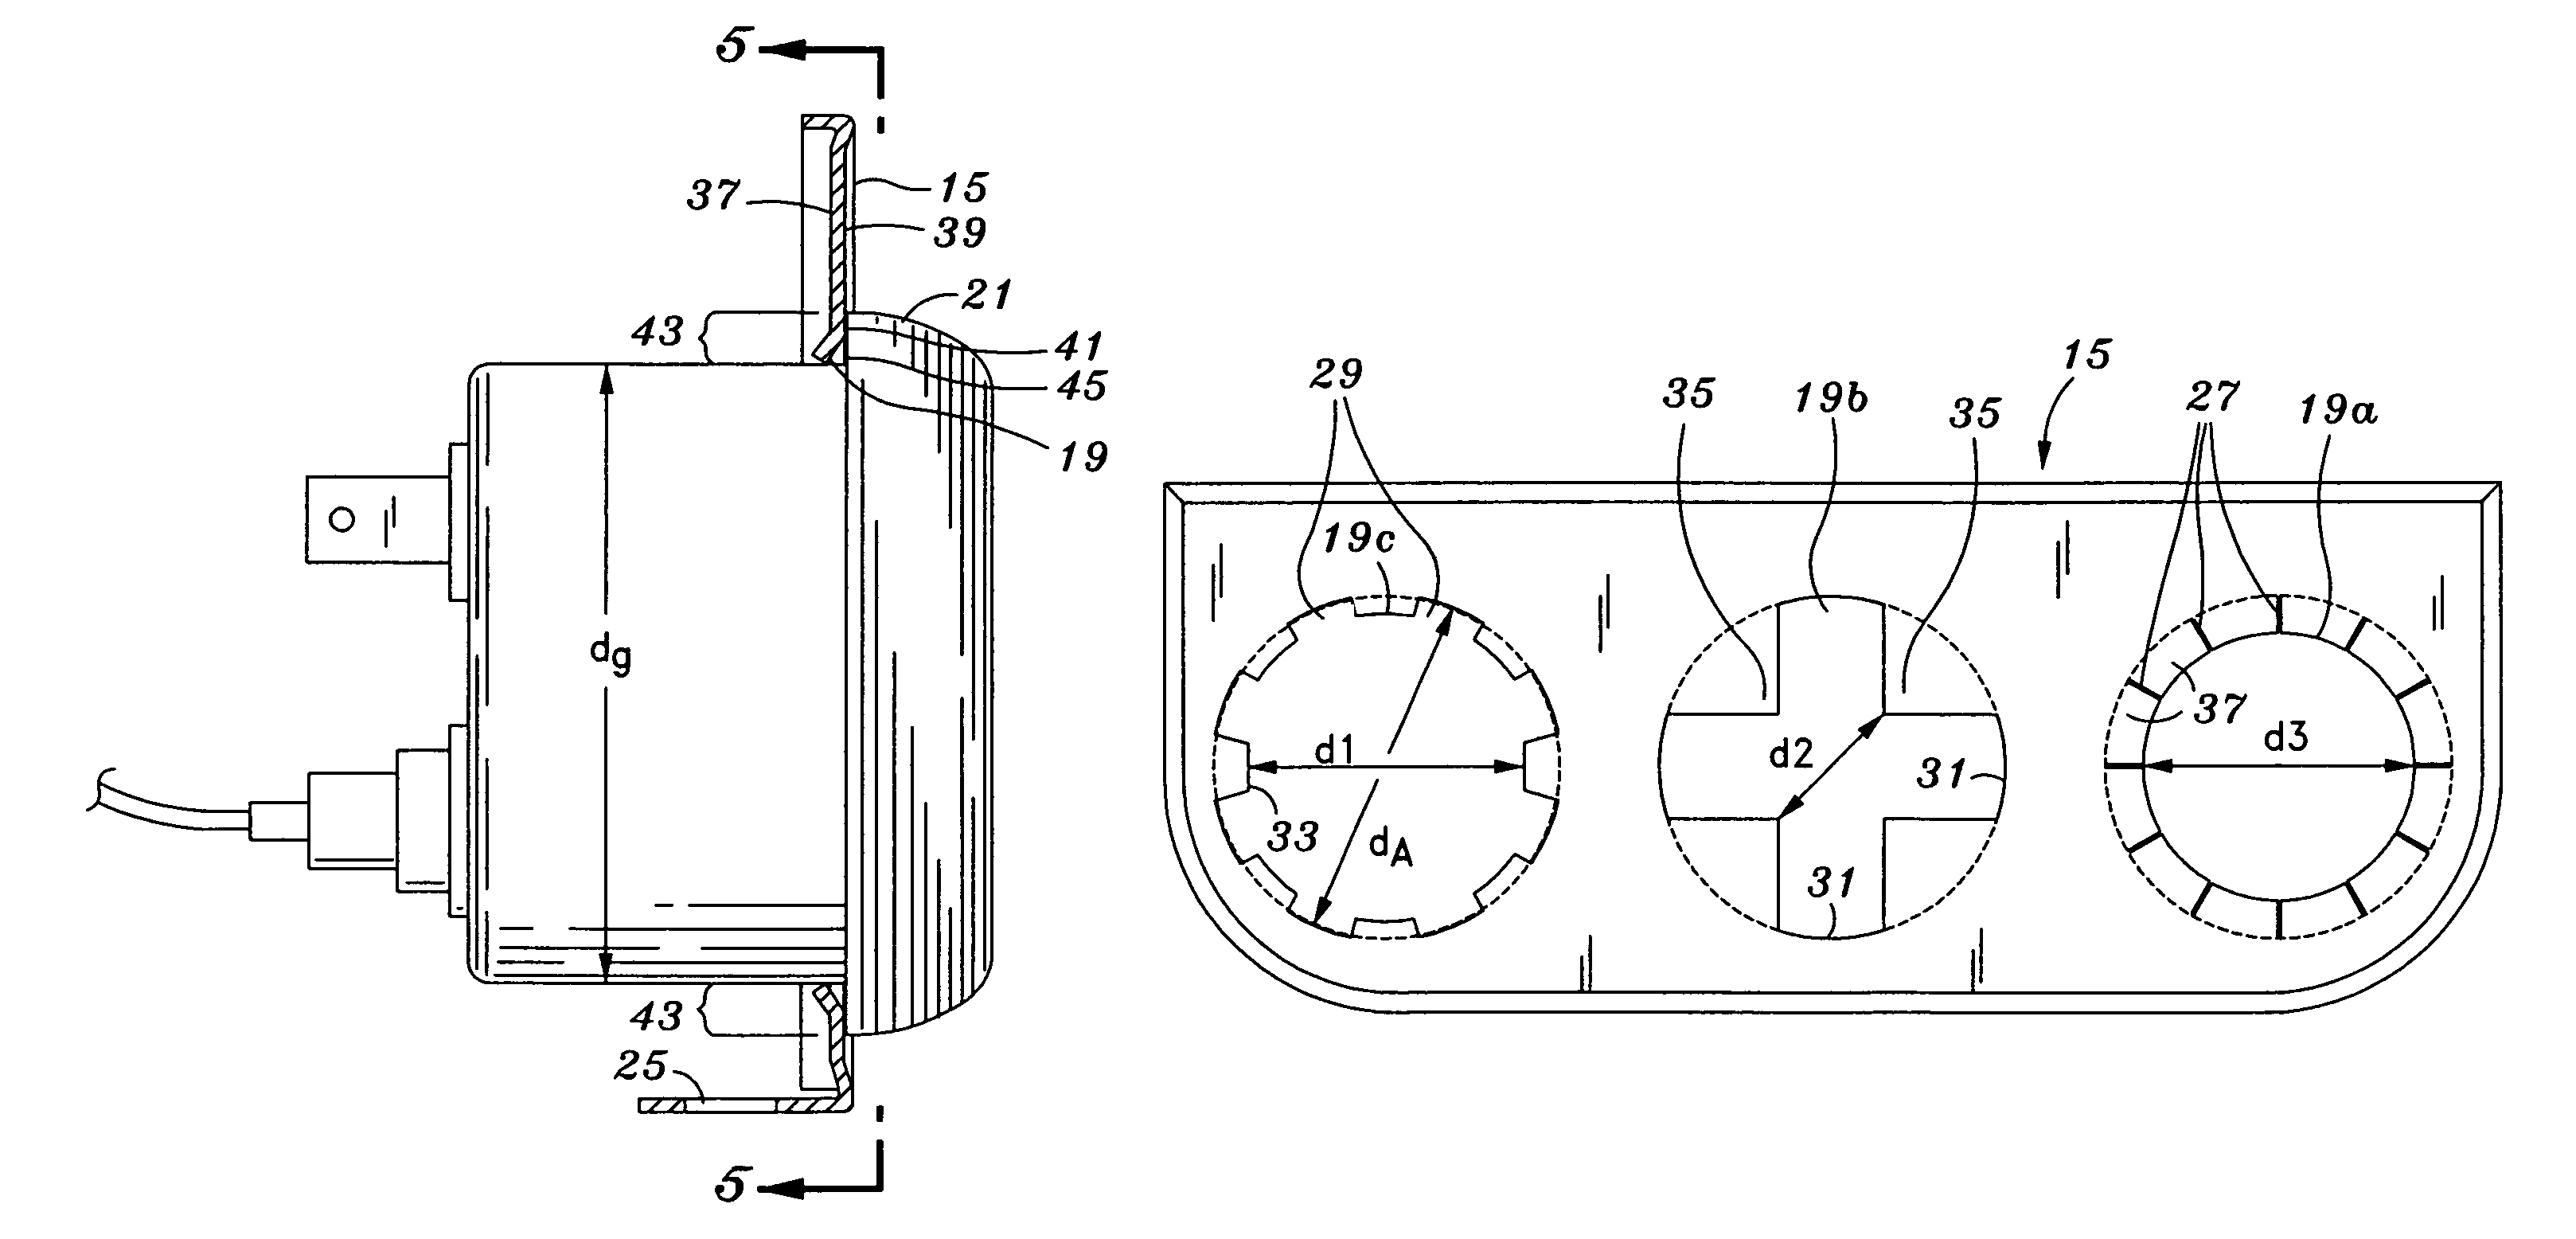 Automotive gauge mounting bracket with frictional fit apertures